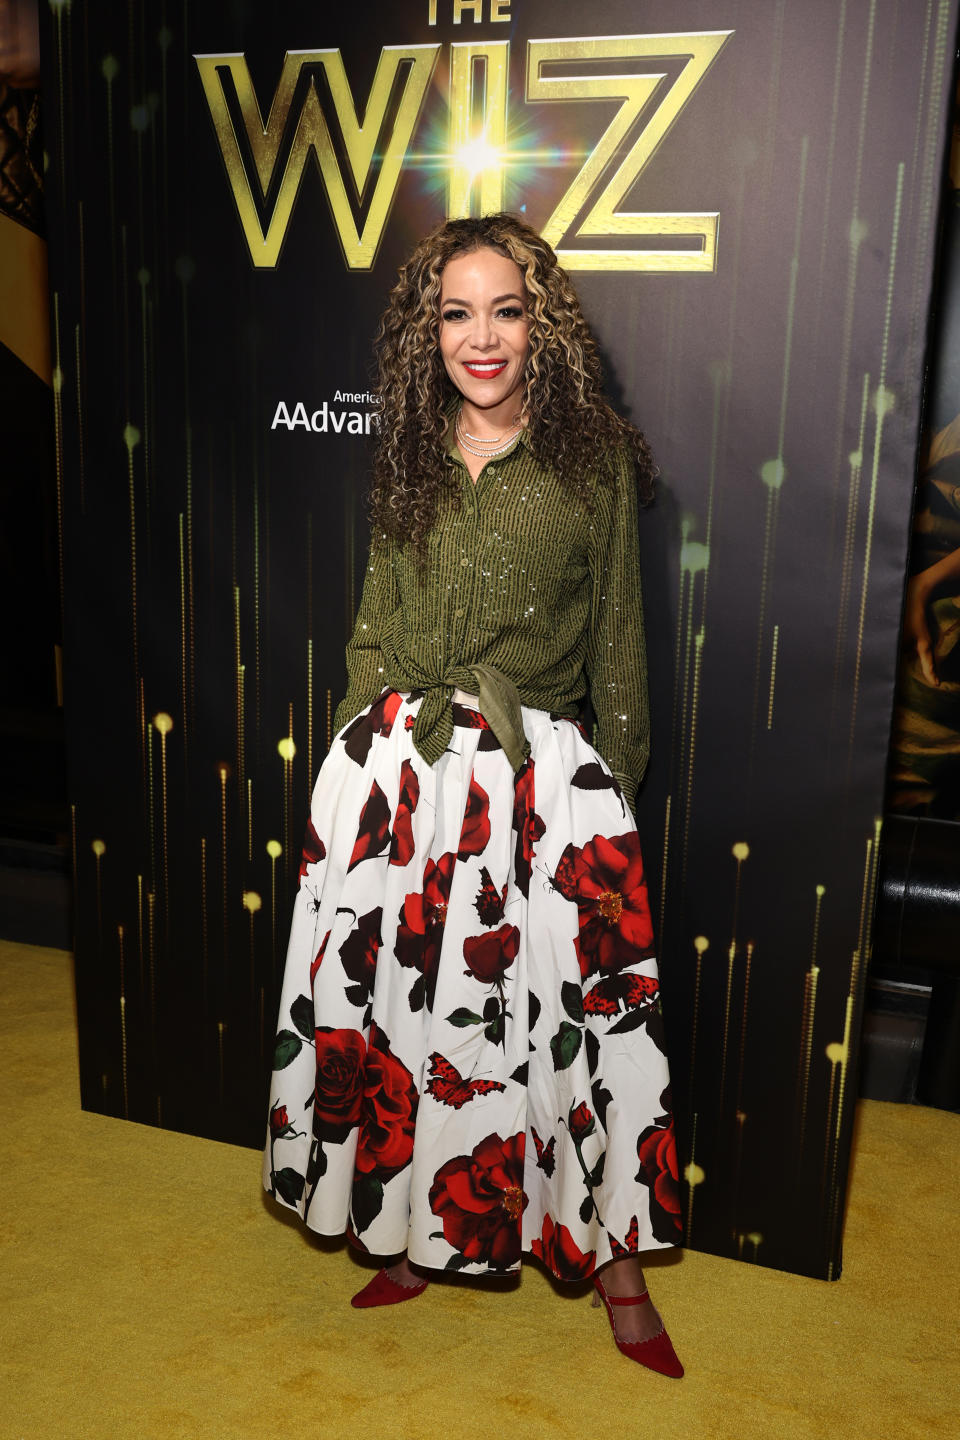 NEW YORK, NEW YORK - APRIL 17: Sunny Hostin attends the broadway opening night of "The Wiz" at Marquee Theatre on April 17, 2024 in New York City. (Photo by Jamie McCarthy/Getty Images)